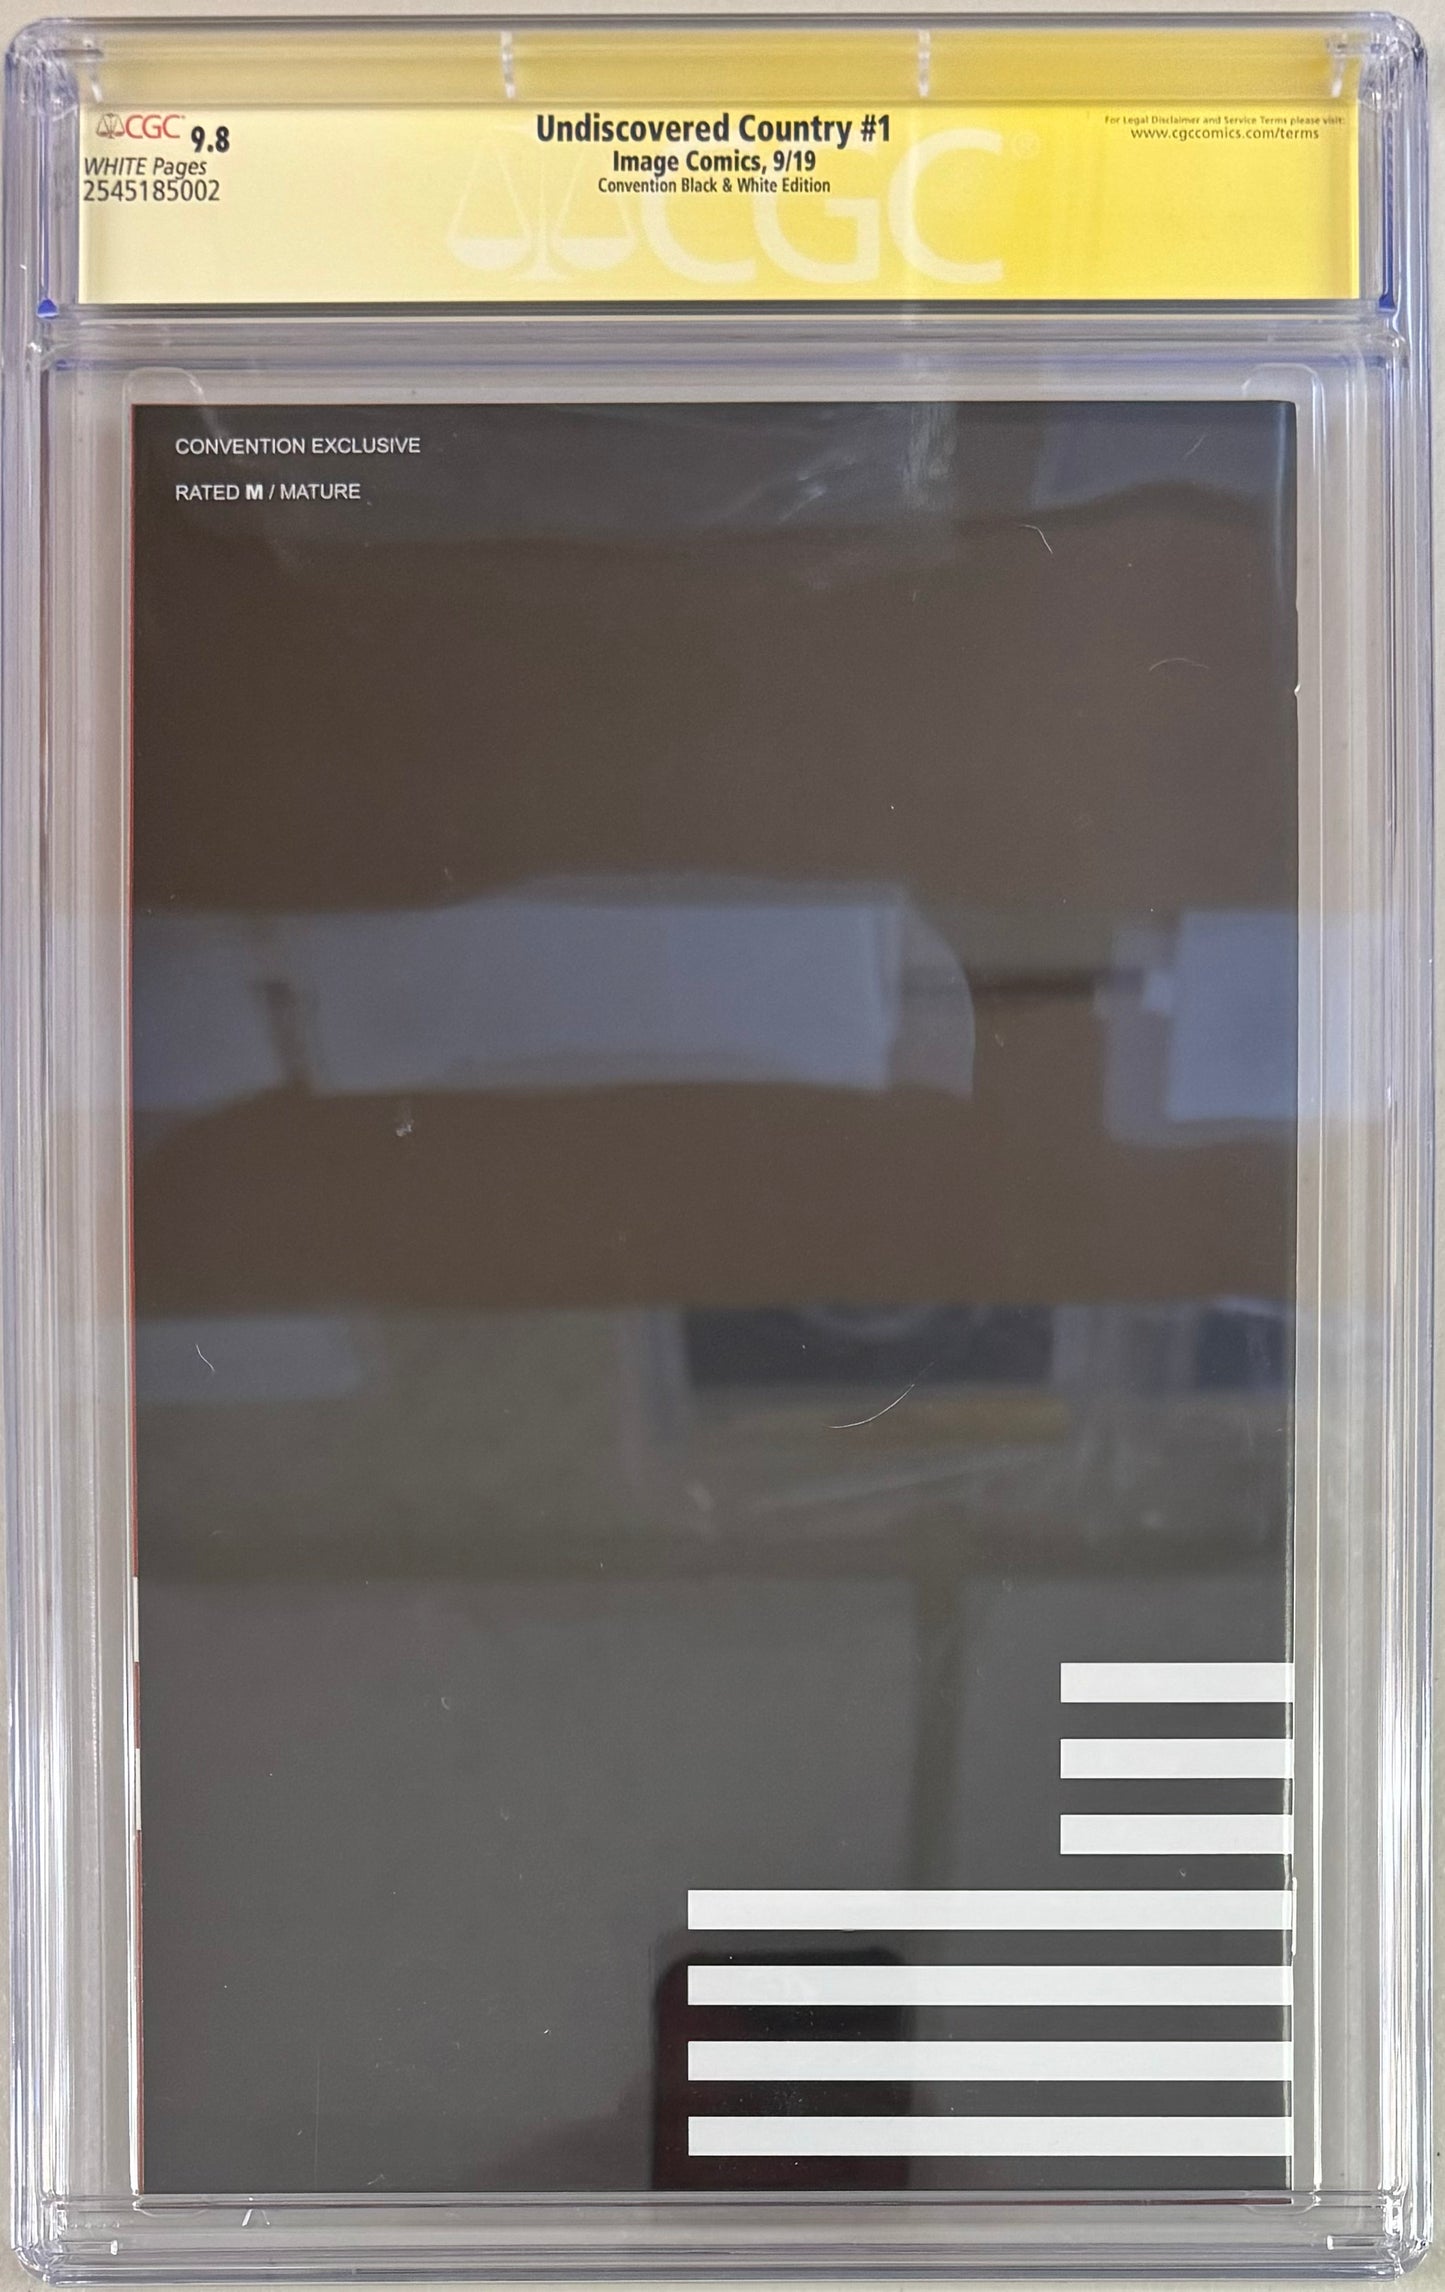 Undiscovered Country #1 Convention Exclusive Variant CGC Signature Series 9.8